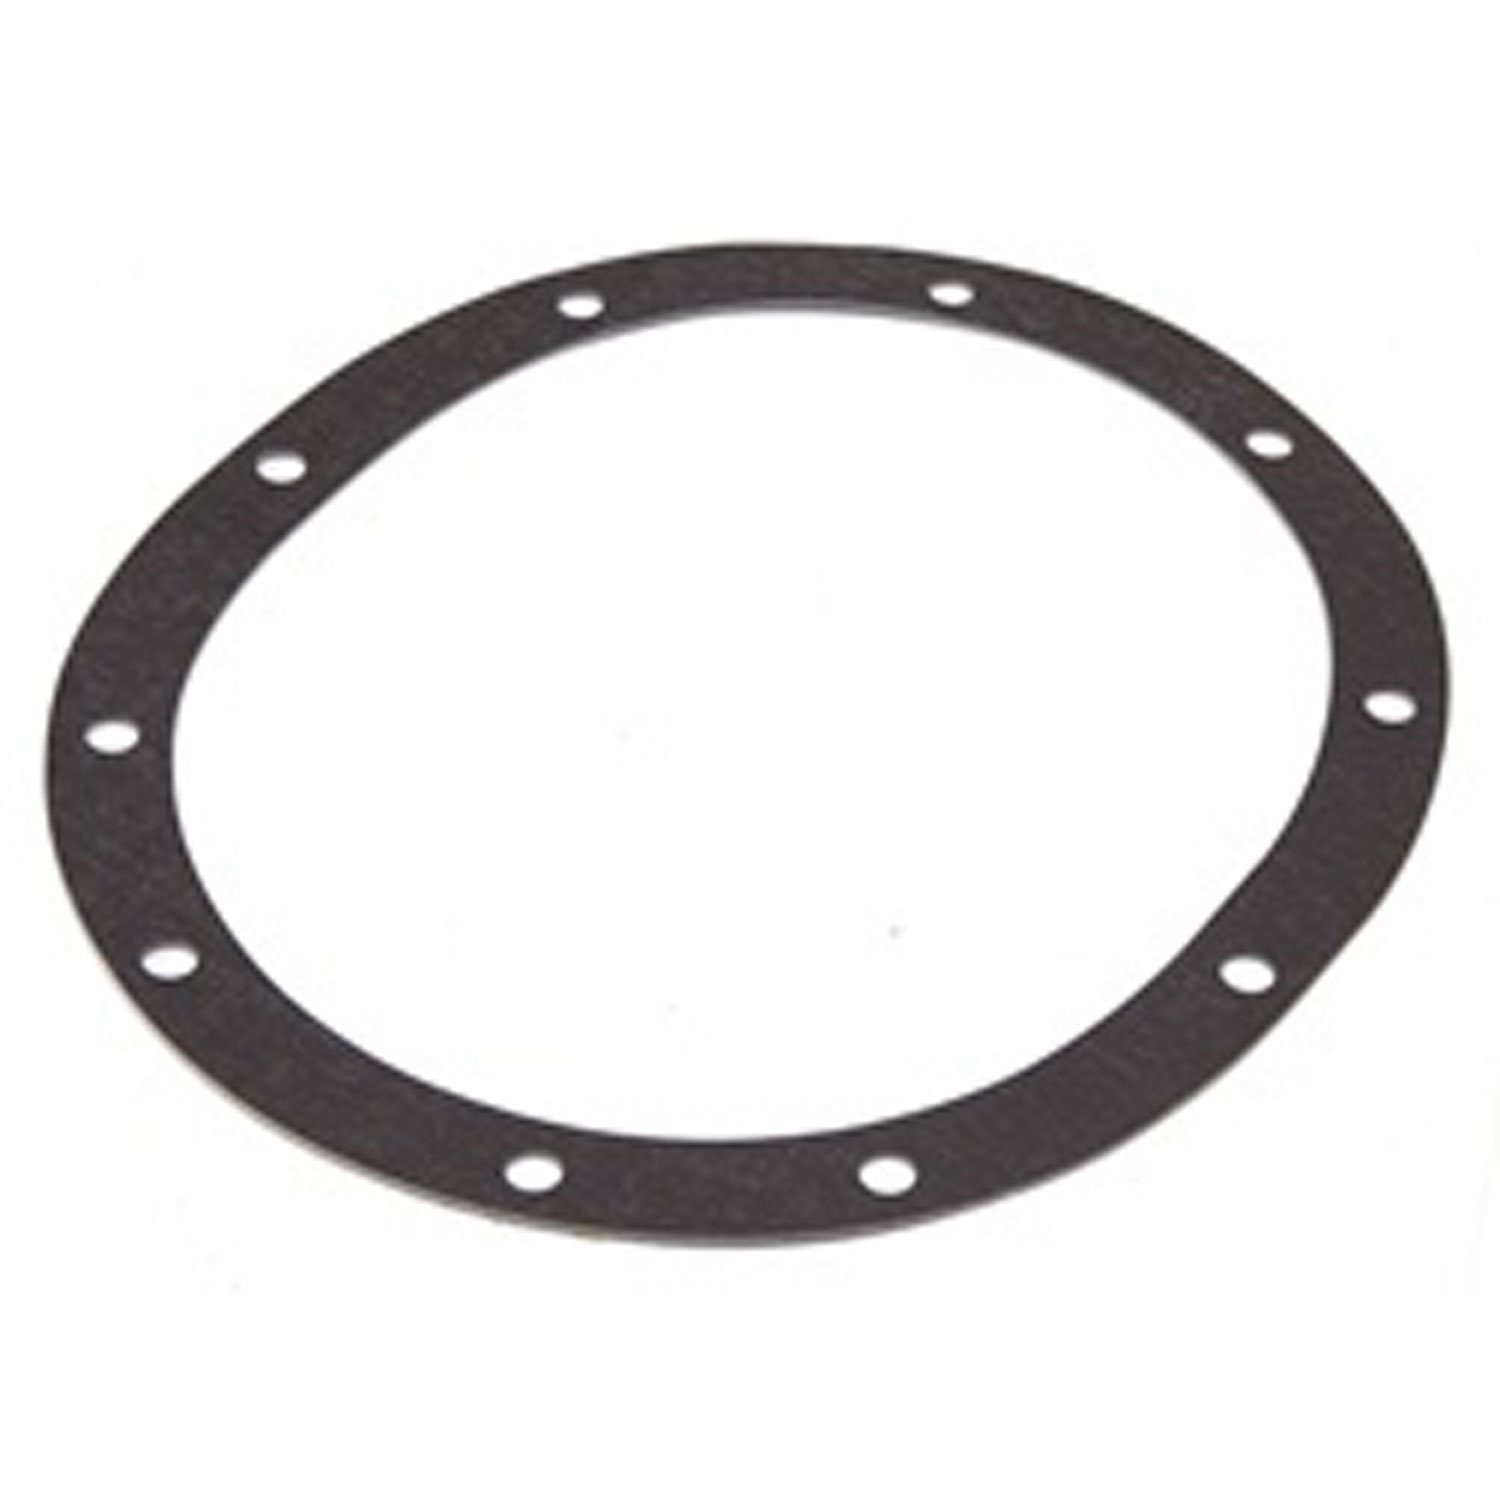 Differential Cover Gasket for Dana 35 Rear Axle